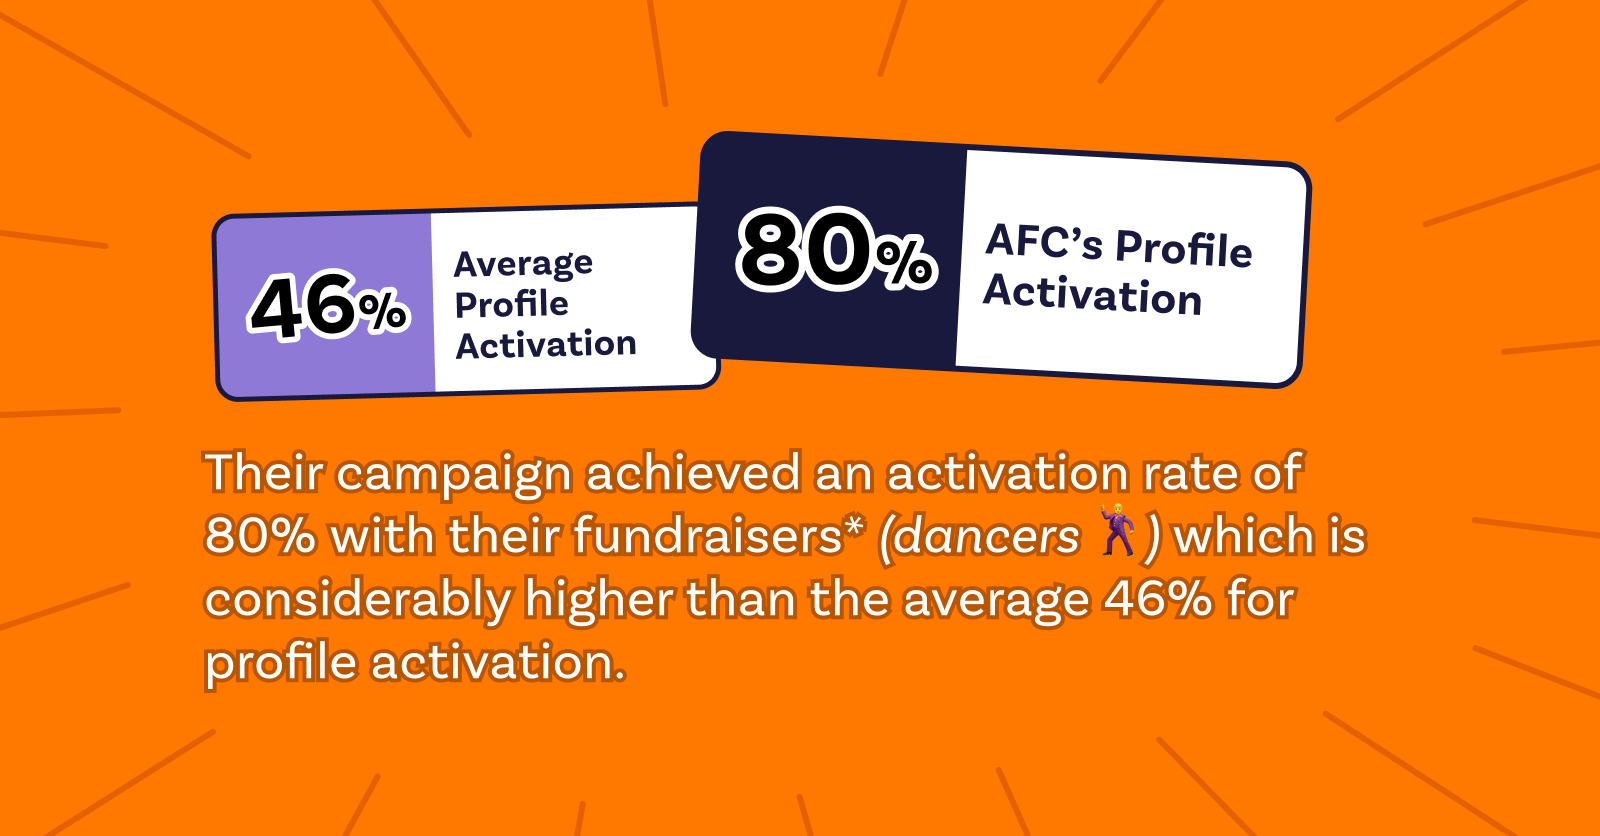 ACF's profile activation rate was 80% which is considerably higher than Raisely's average 46%.